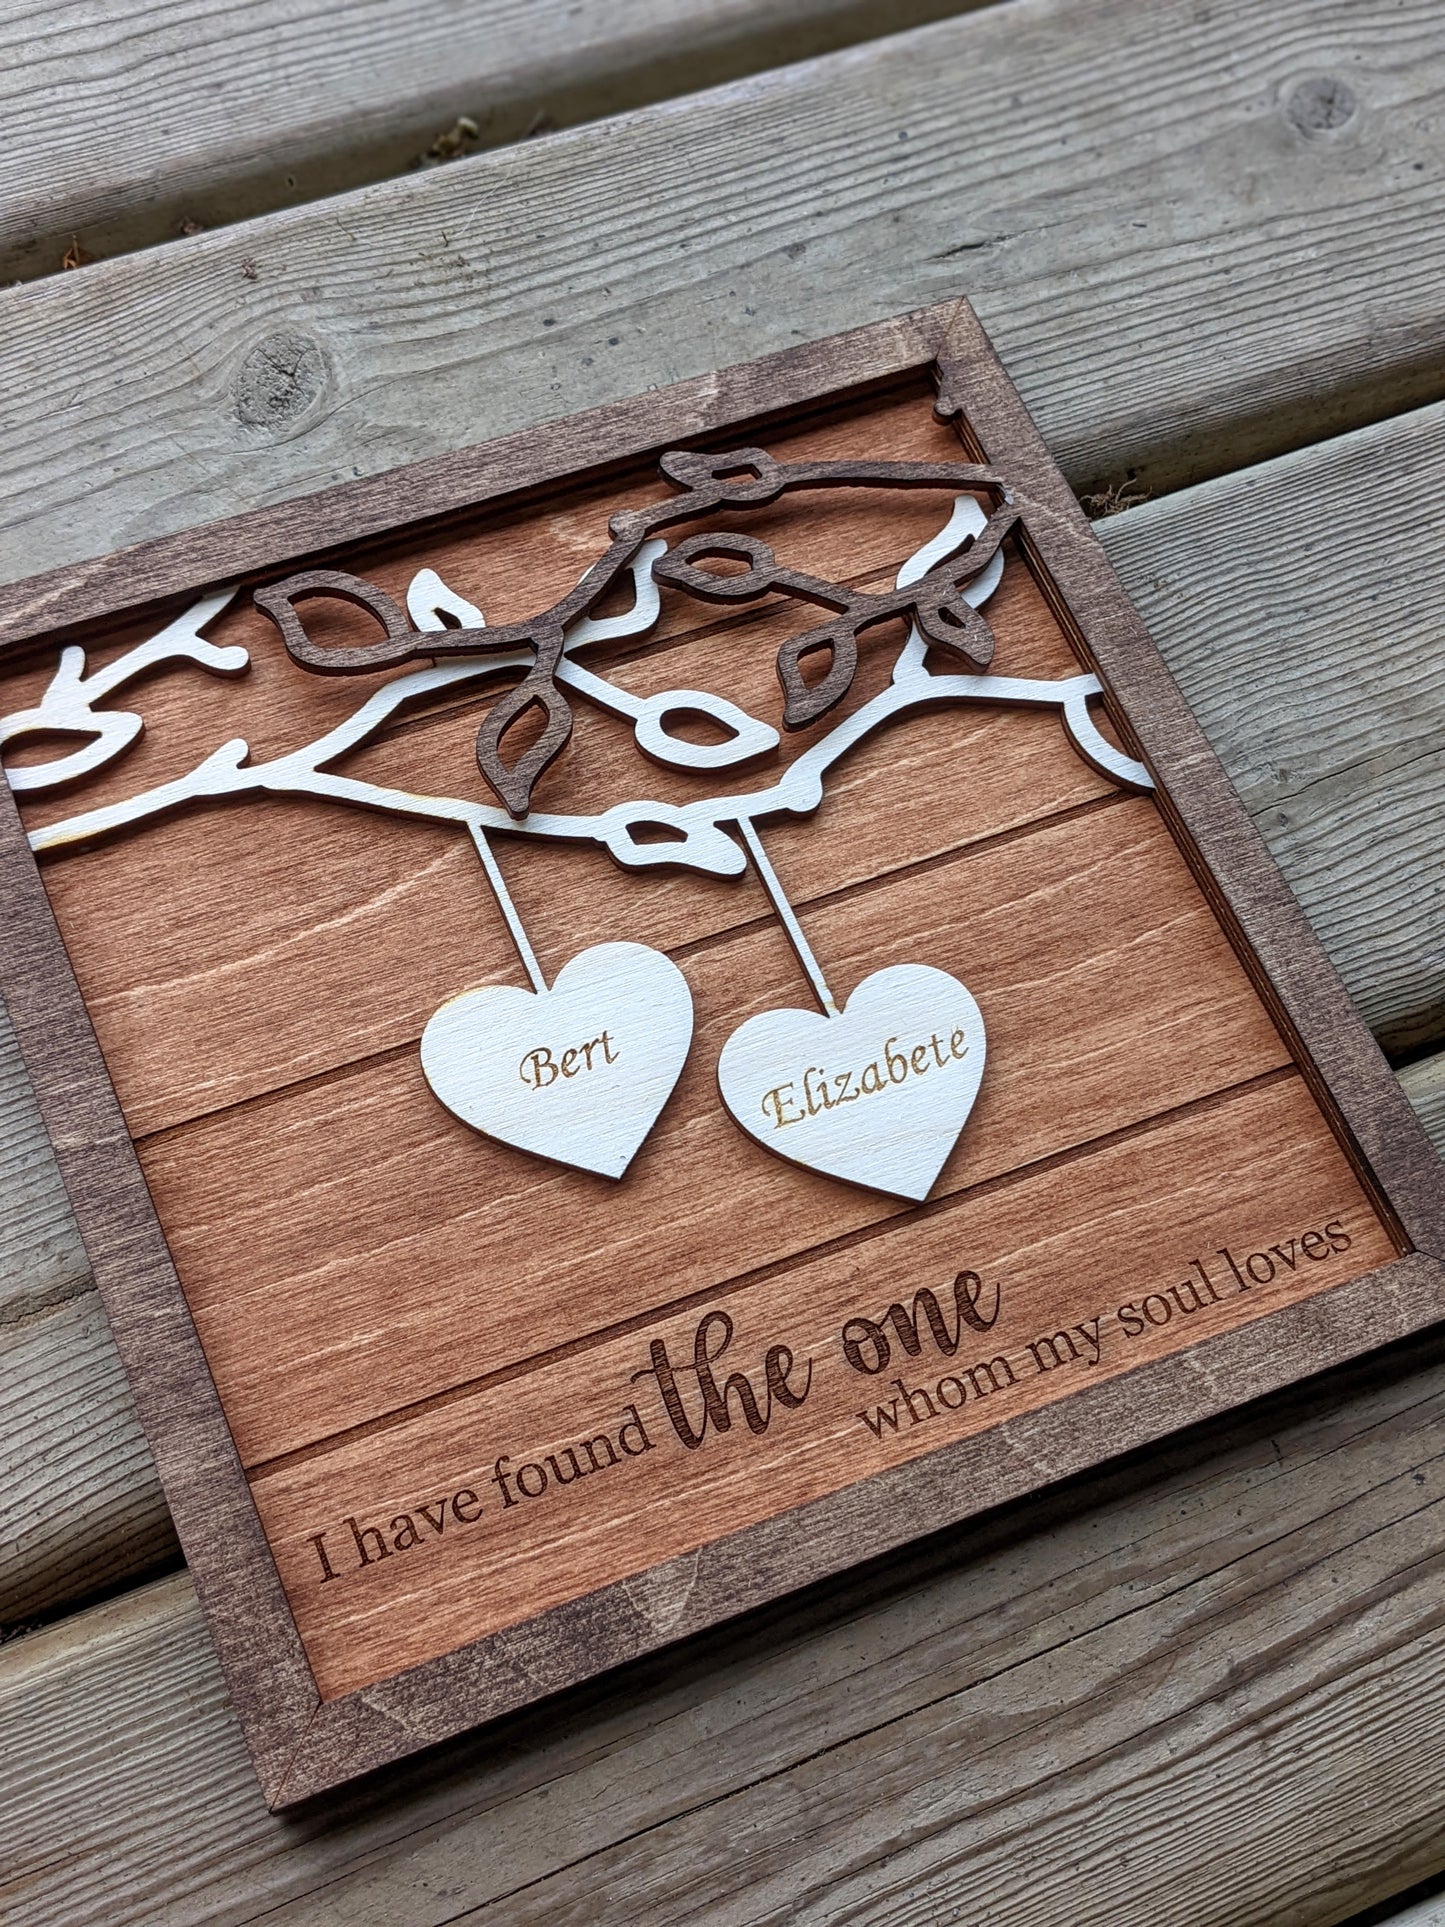 Personalized Valentine's Day Heart Sign